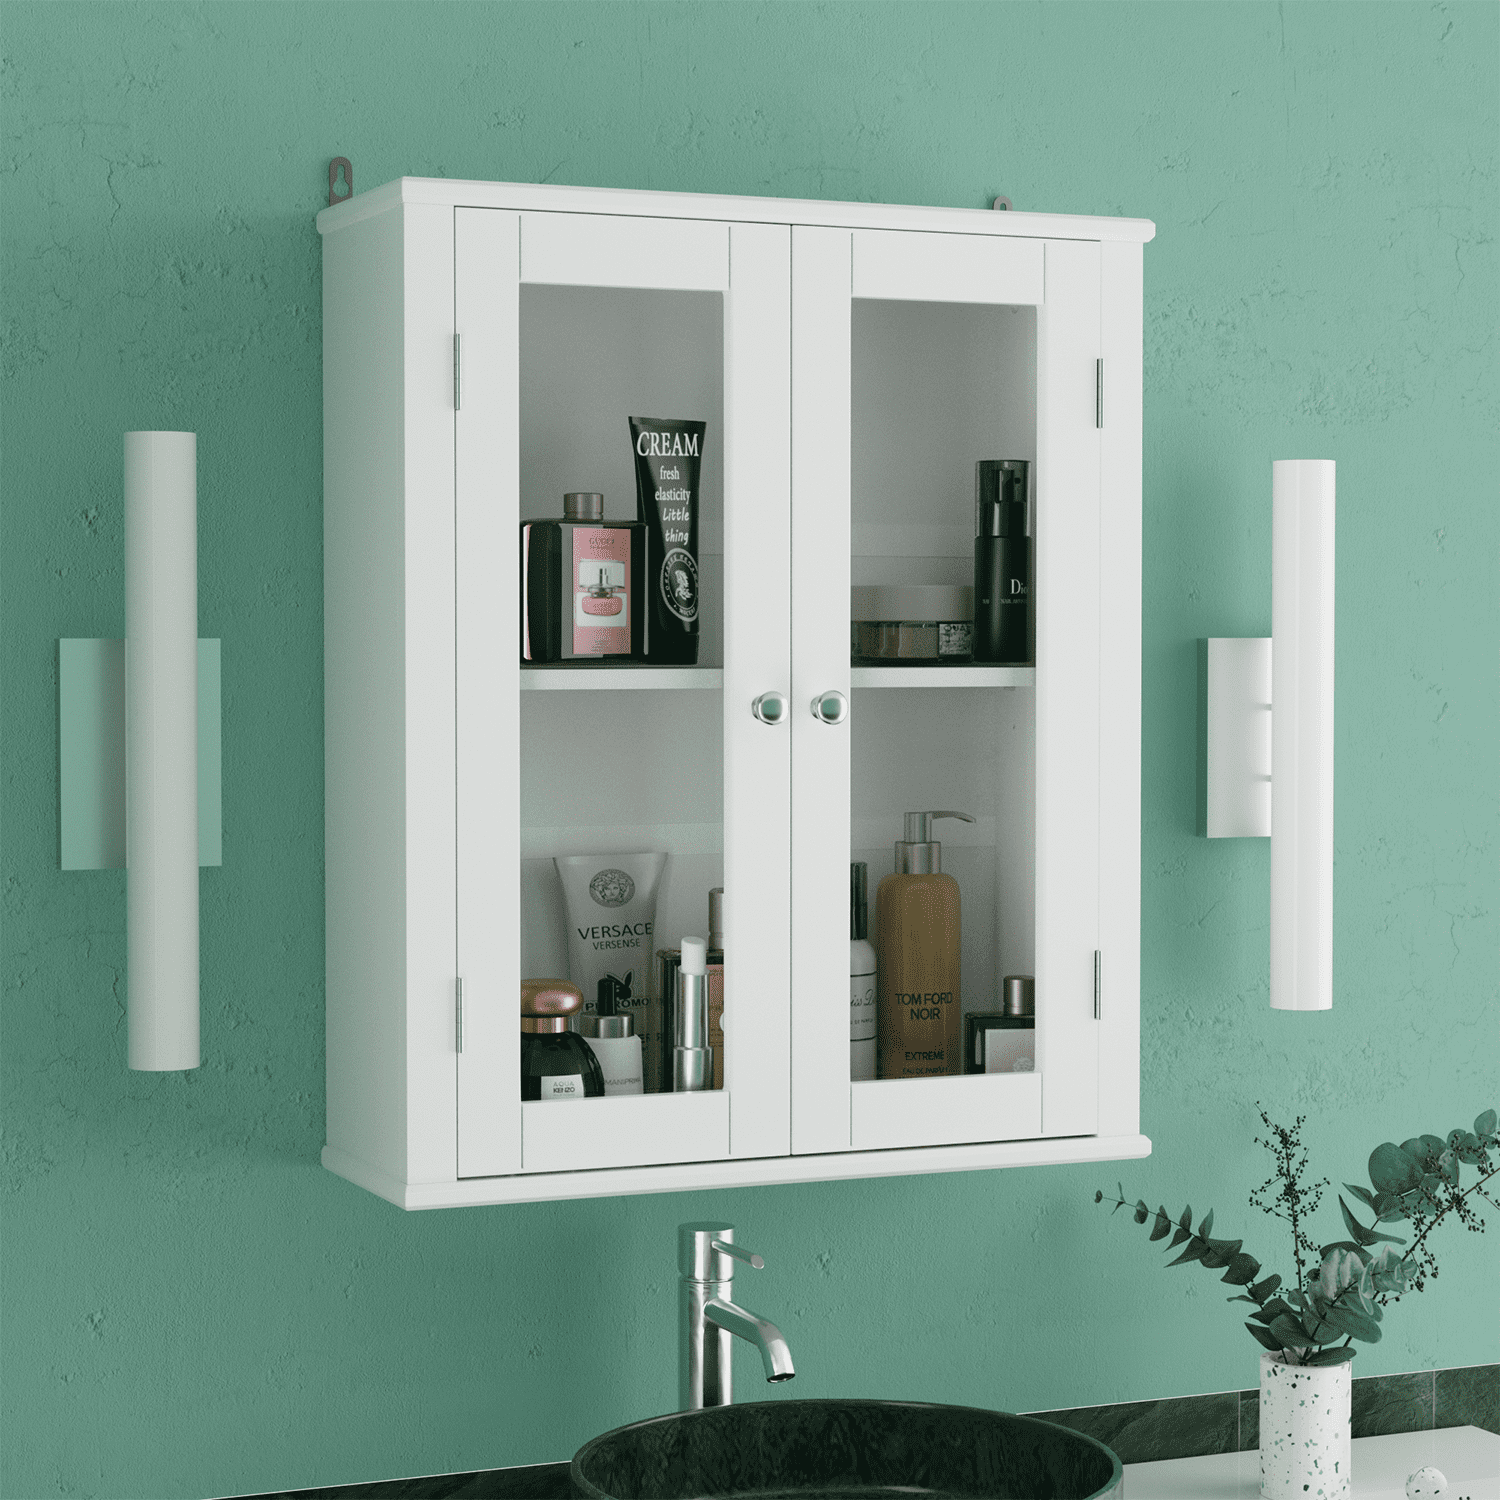 Dropship 23x24x8.2 Inch Wooden Bathroom Medicine Cabinet For Storage With  Adjustable Shelf; Wall Mounted Bathroom Cabinet With Towel Bar; MDF  Material White Bathroom Wall Cabinet With Buffering Hinge to Sell Online at